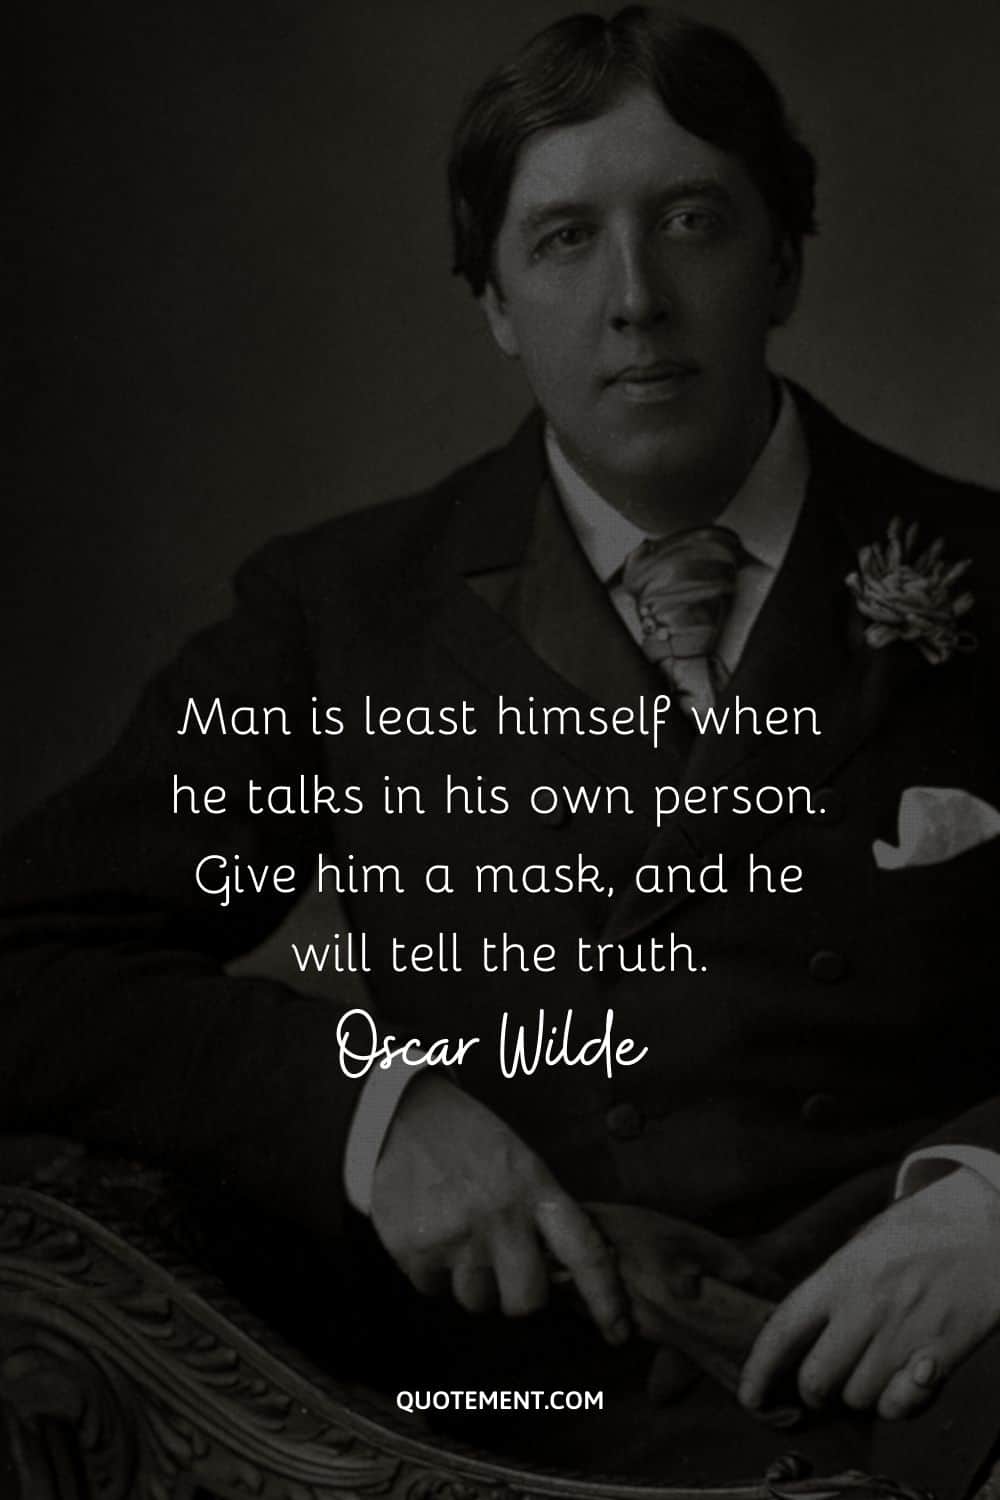 “Man is least himself when he talks in his own person. Give him a mask, and he will tell the truth.” ― Oscar Wilde (The Critic as Artist )